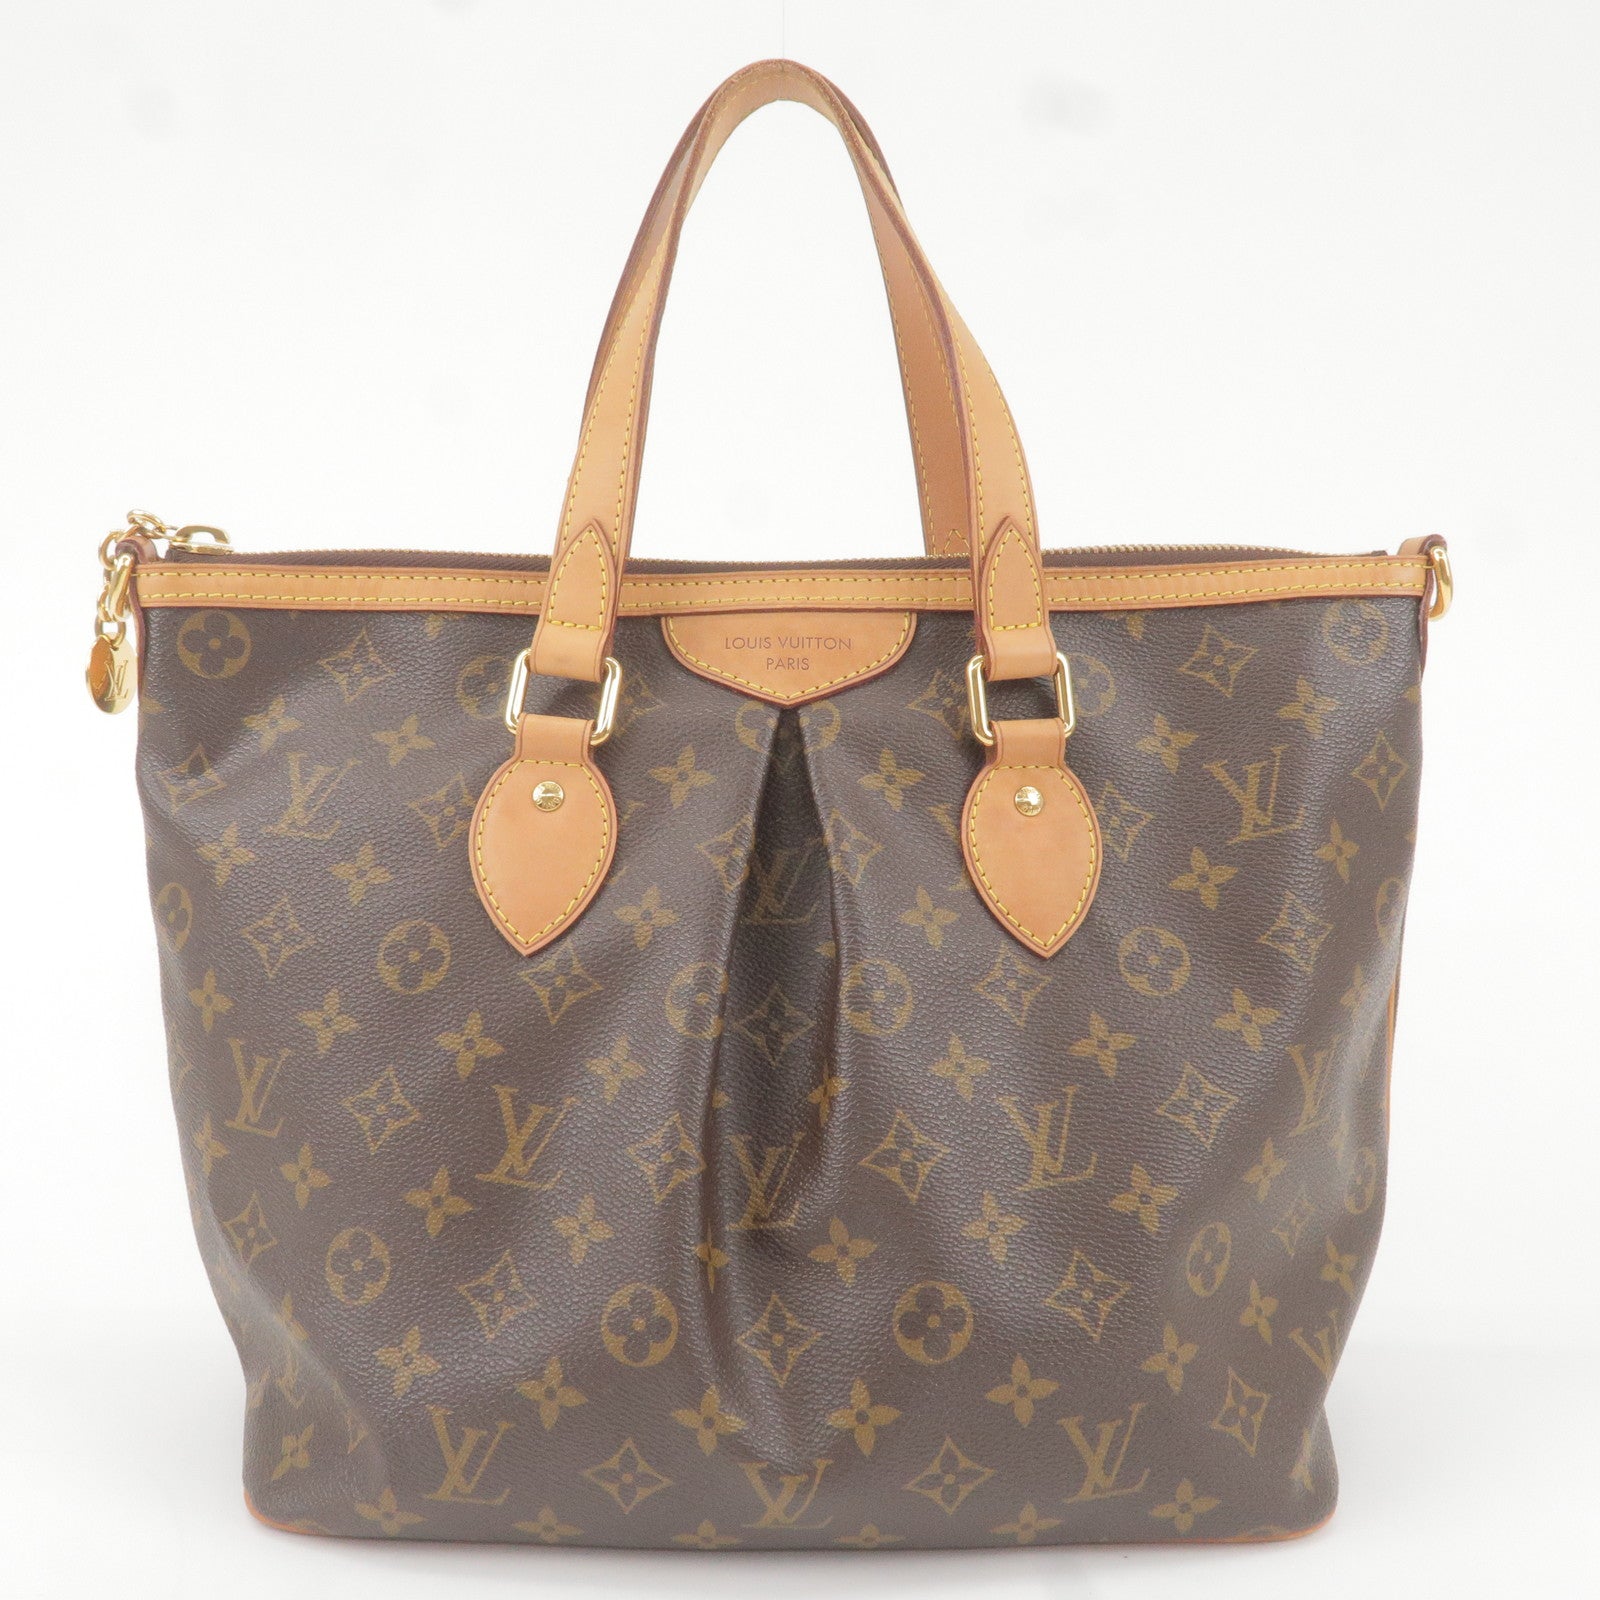 Louis Vuitton x Stephen Sprouse 2001 pre-owned Speedy 30 Bag - Farfetch